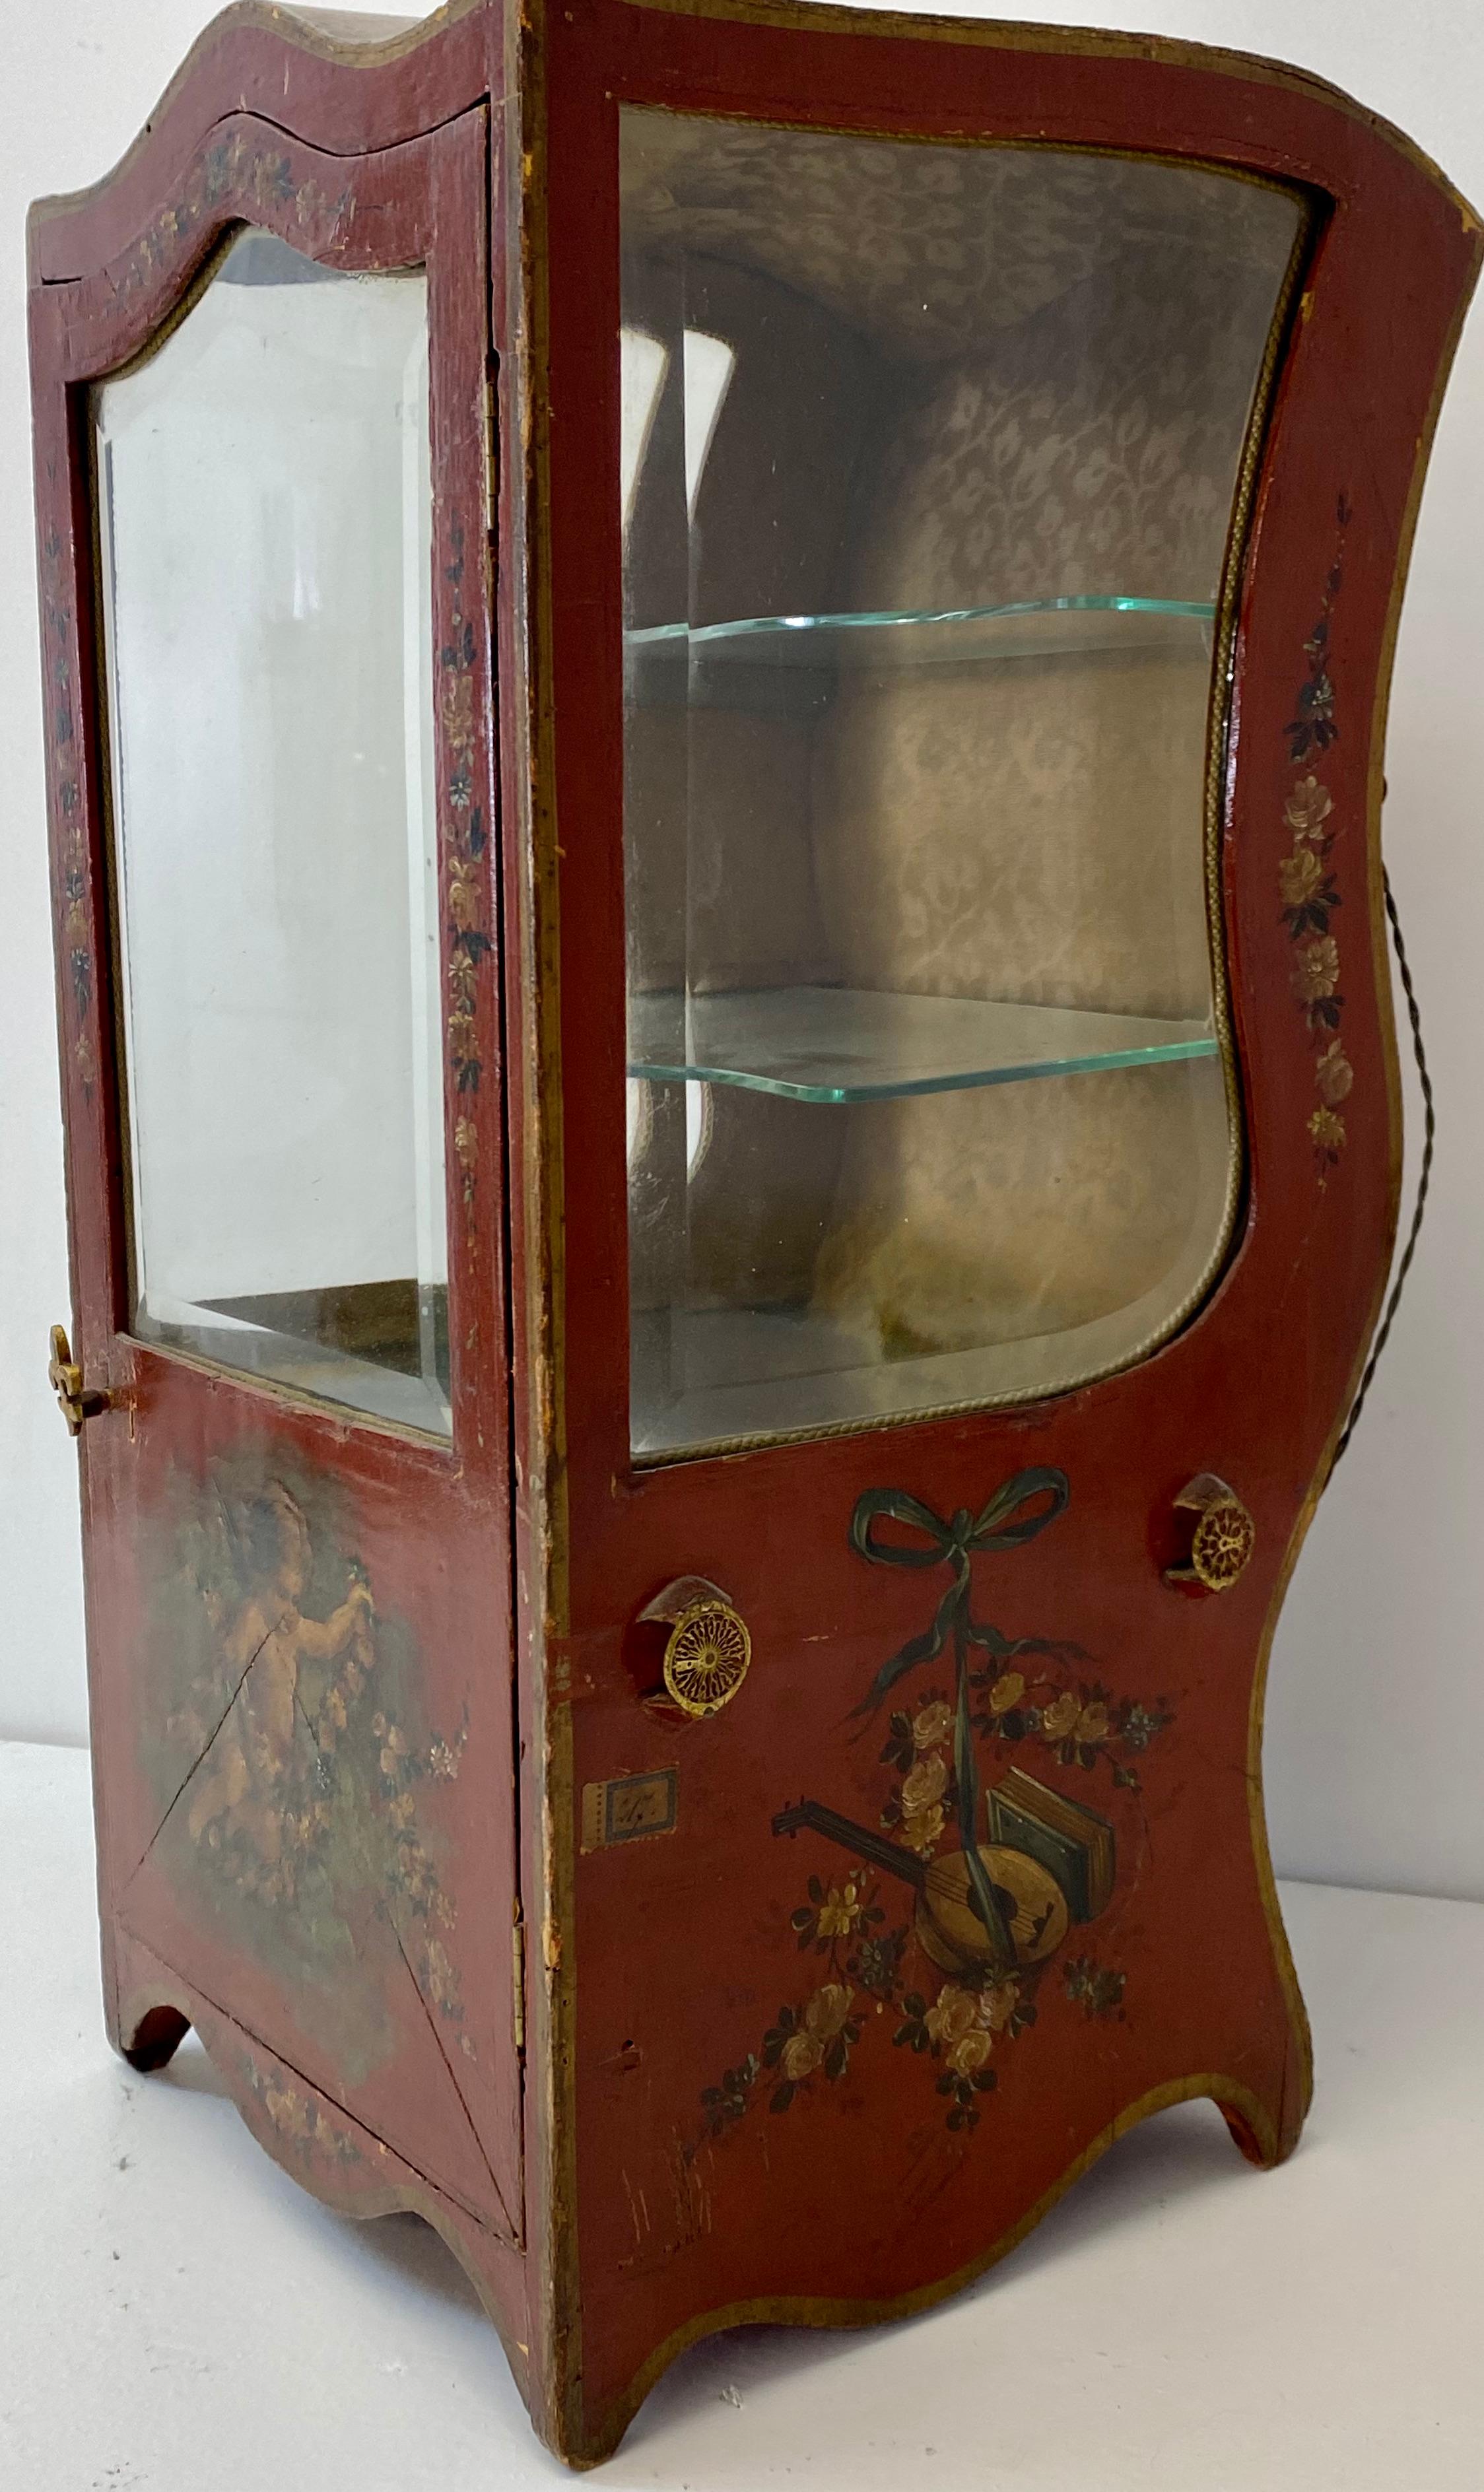 Rococo Late 19th to Early 20th Century Sedan Chair Miniature Table Top Display Cabinet For Sale